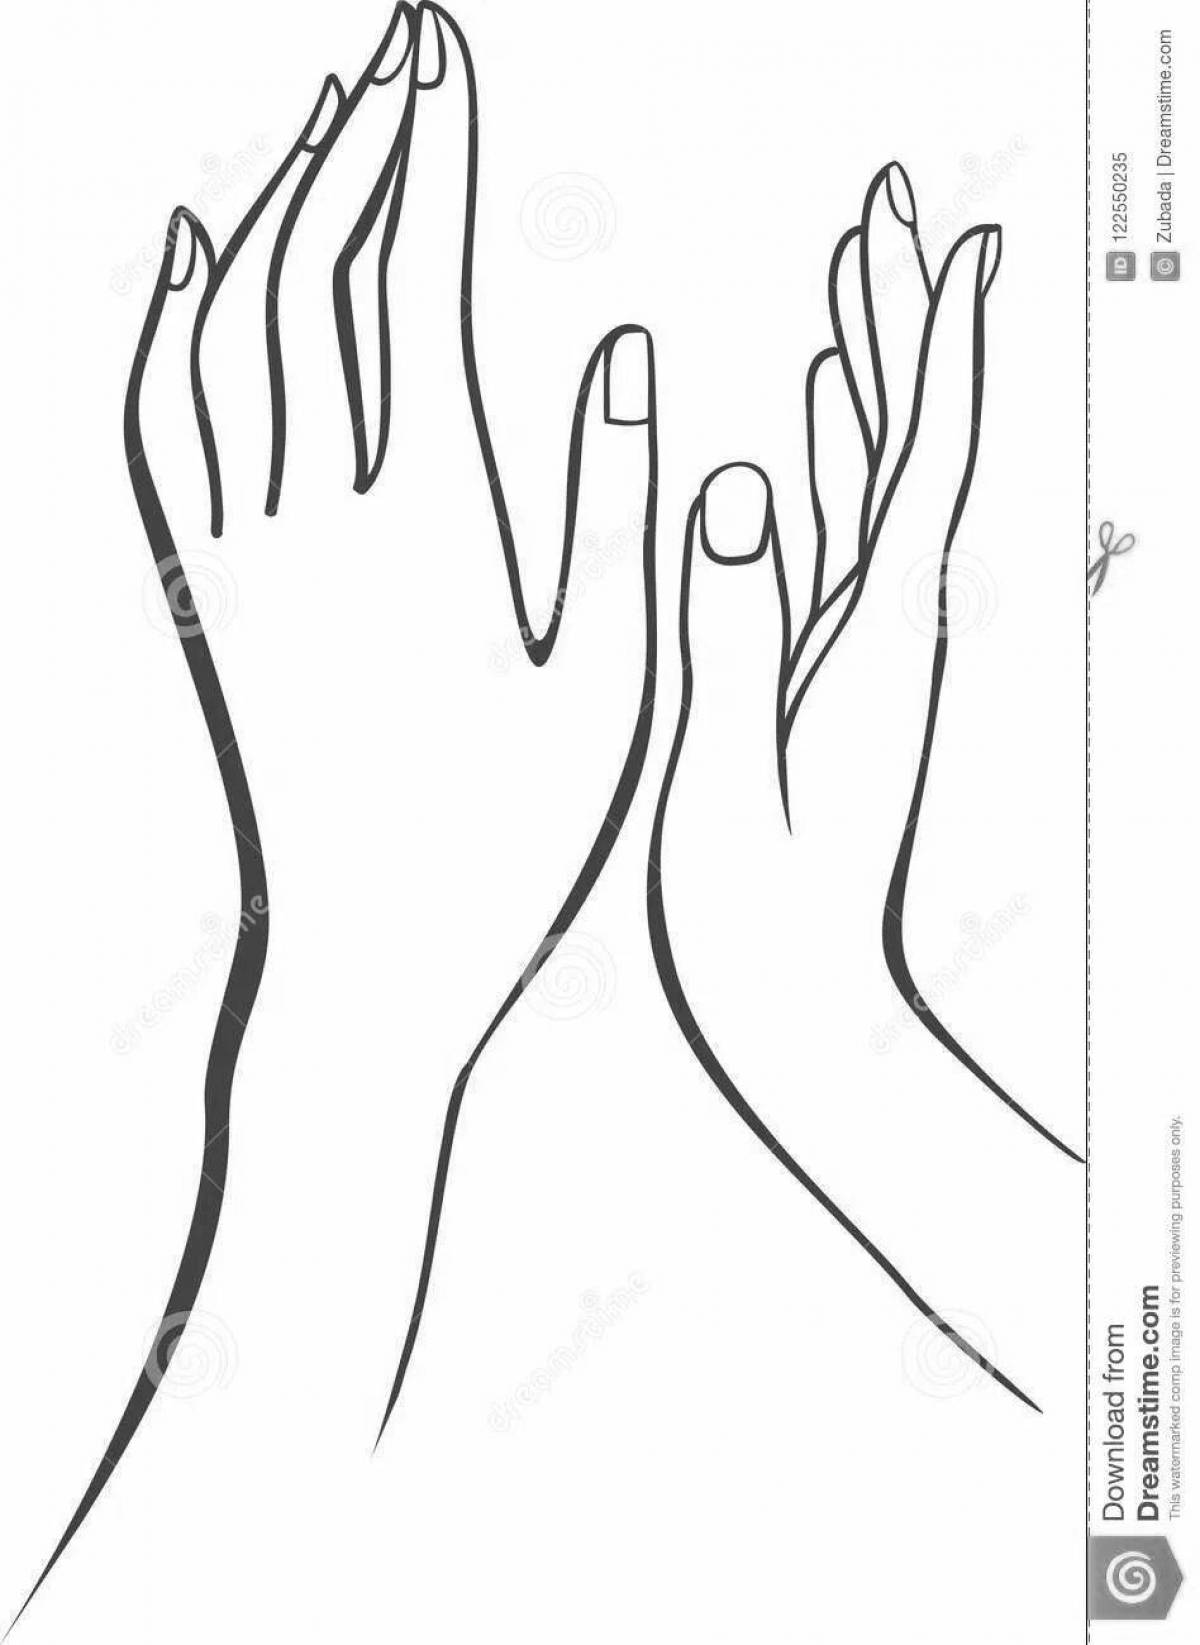 Coloring page of a happy female hand